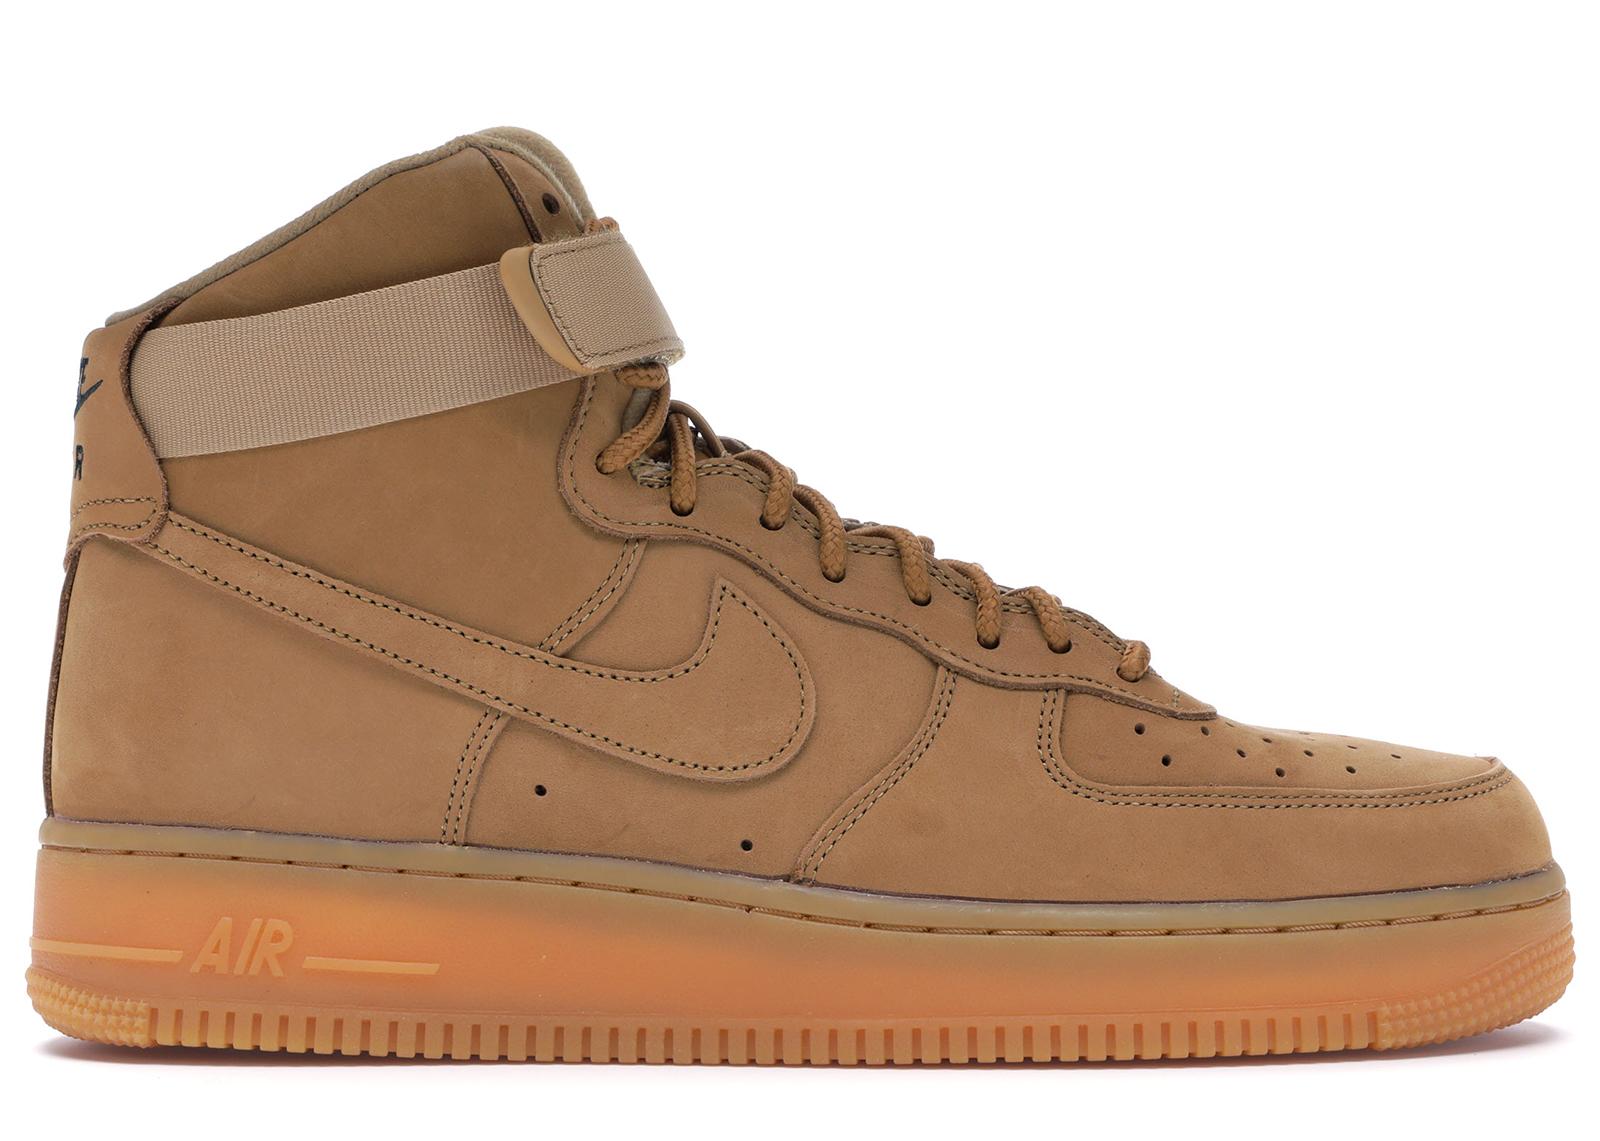 Nike Air Force 1 High Flax (2017) in Brown for Men - Lyst